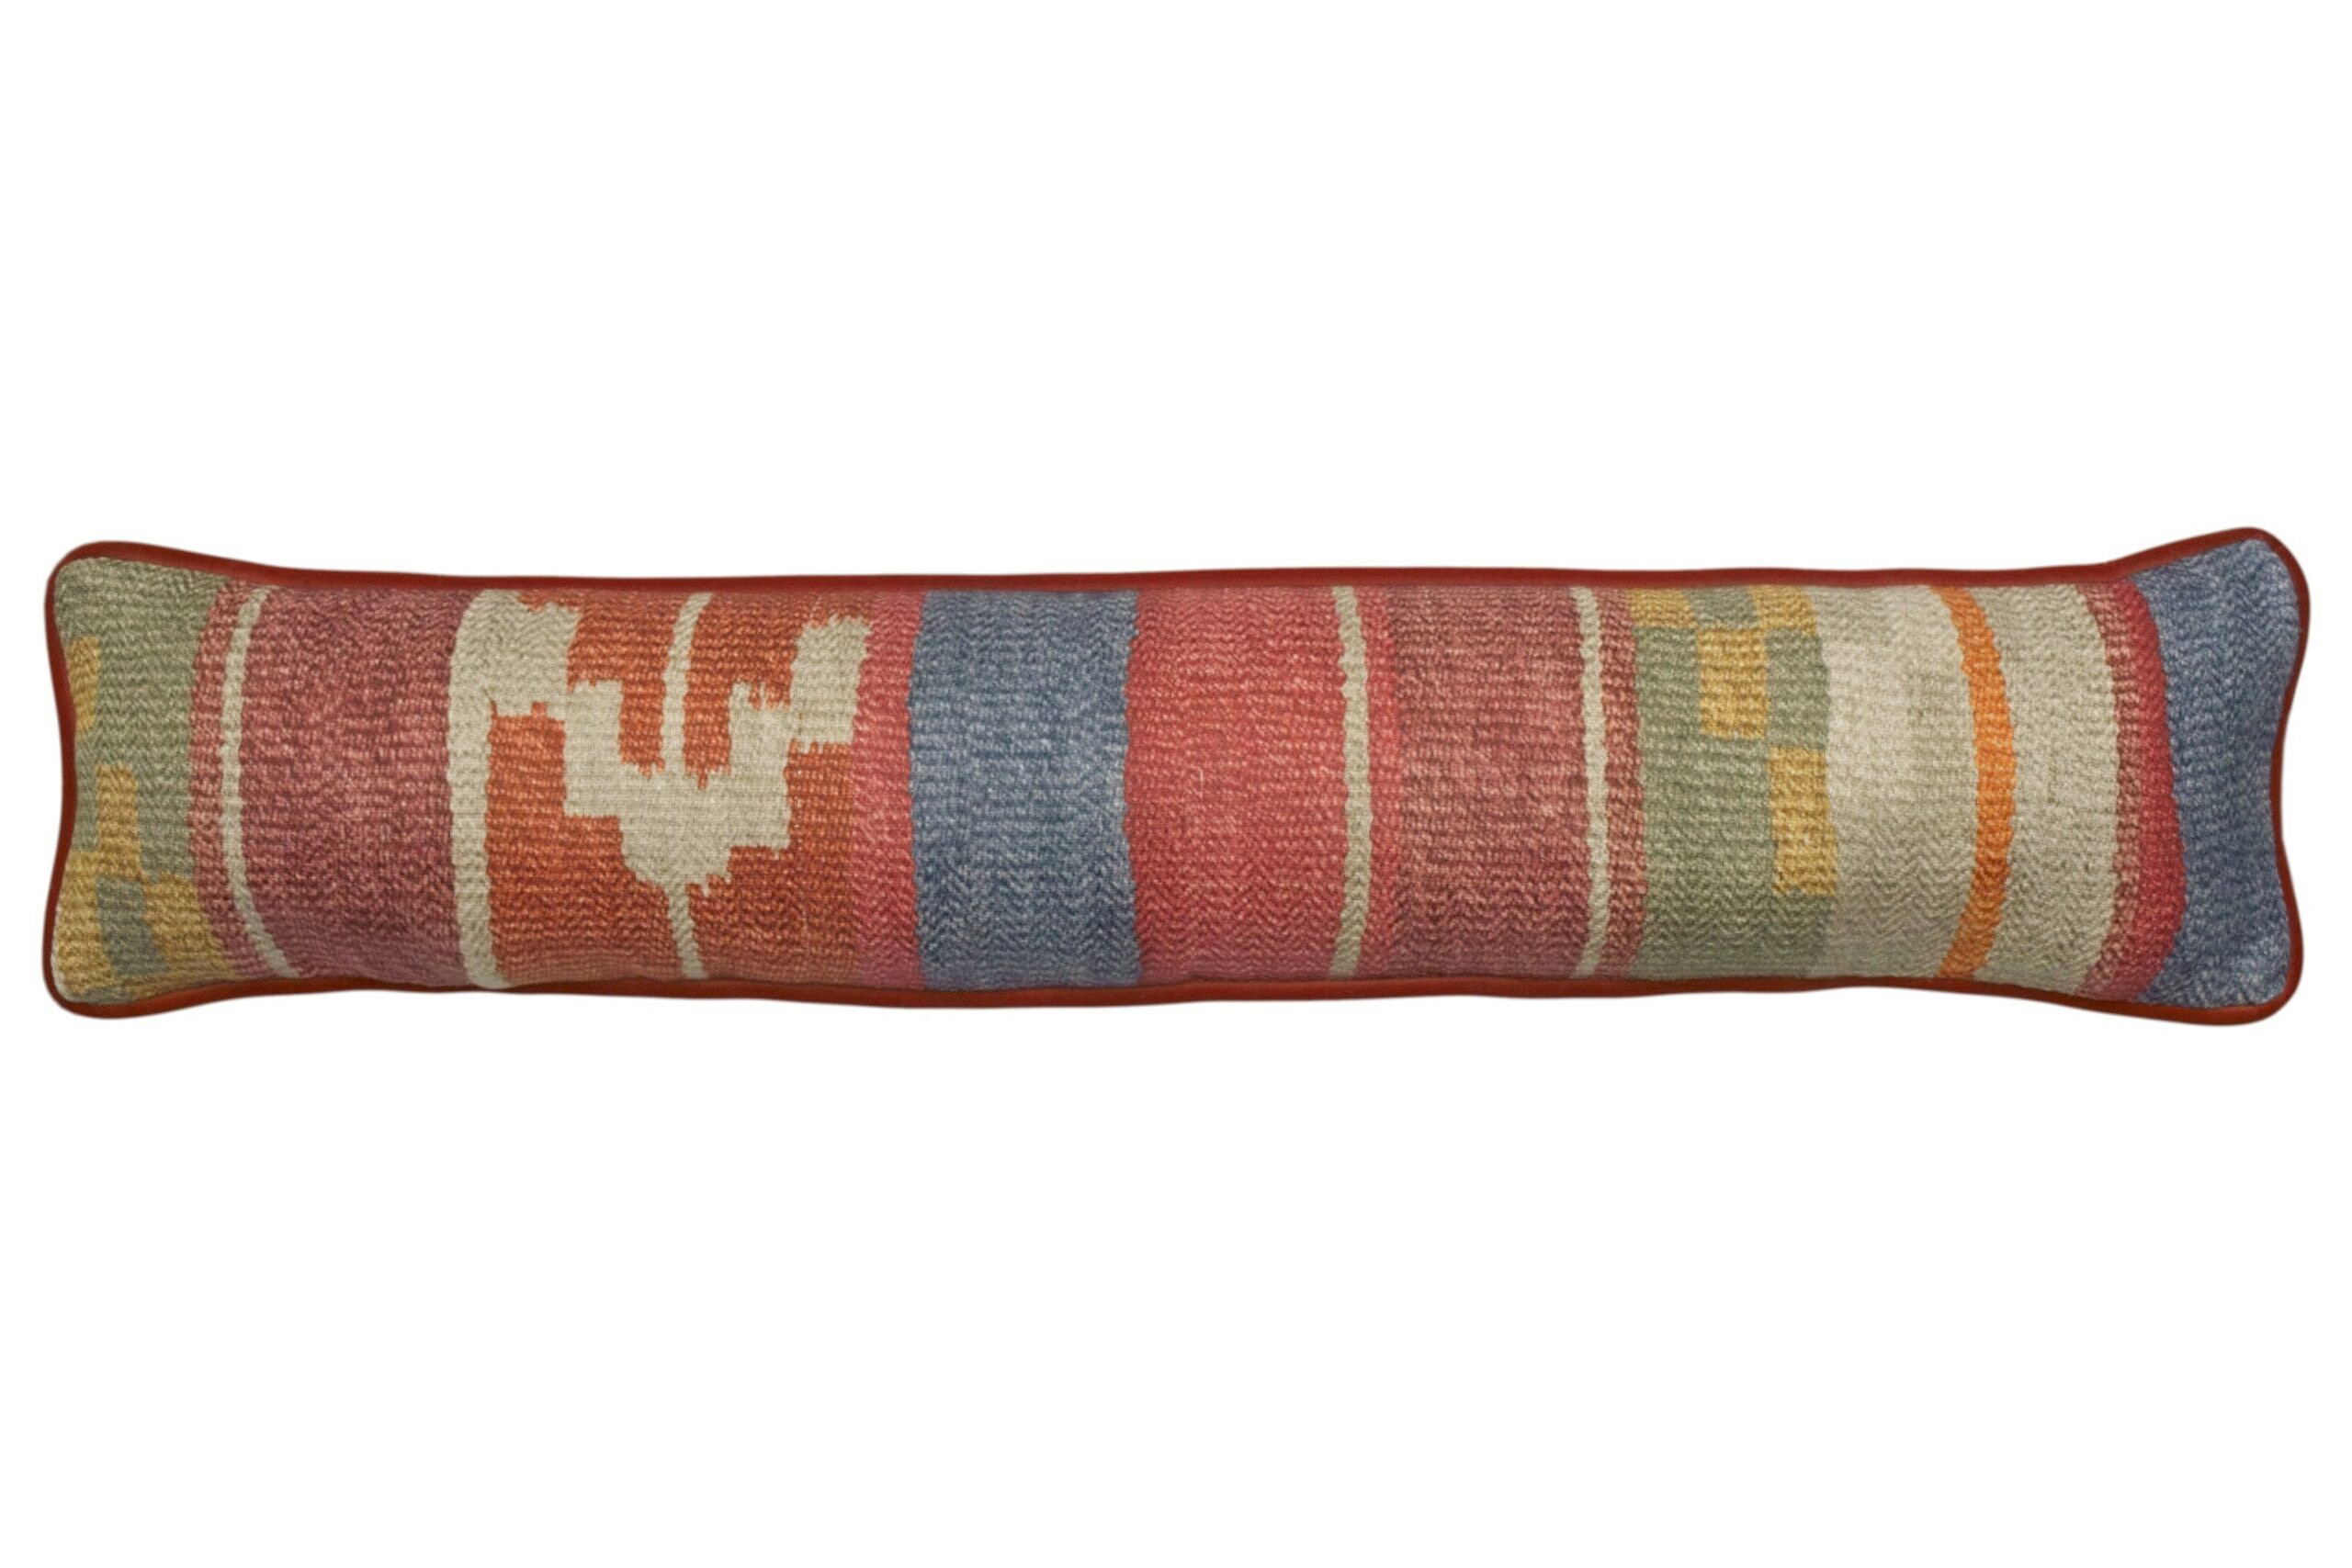 'Indus Brick' draught excluder, Andrew Martin